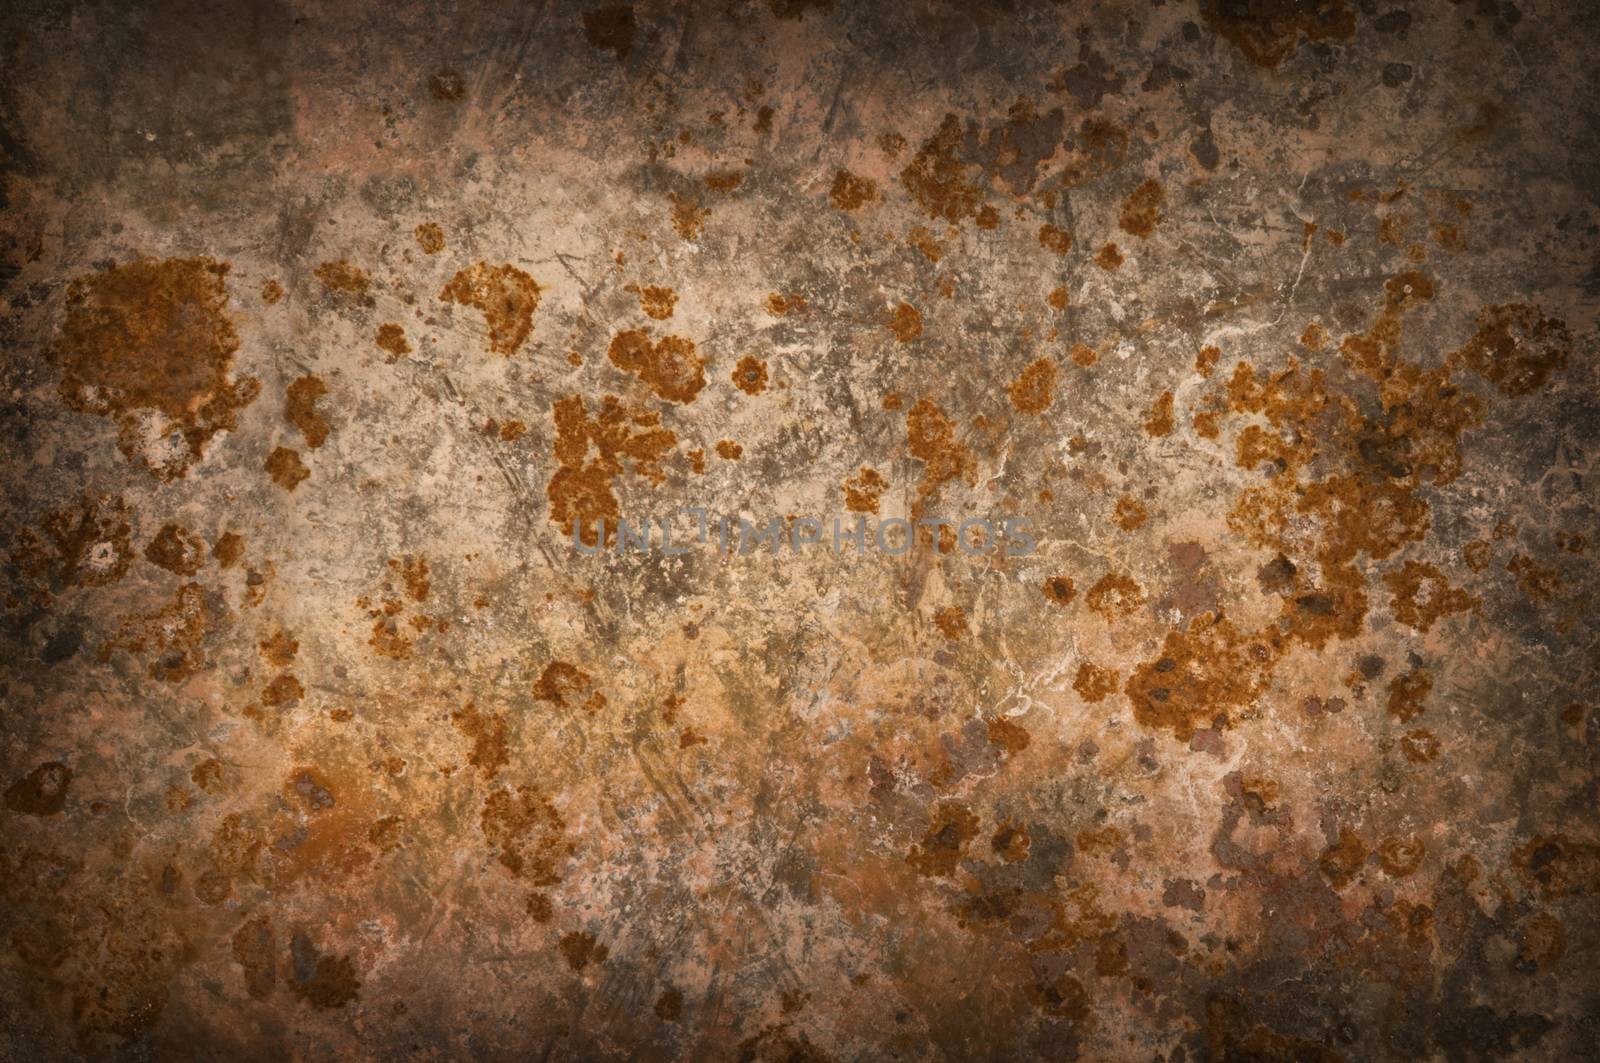 Metal background with rusty corrosion by Balefire9